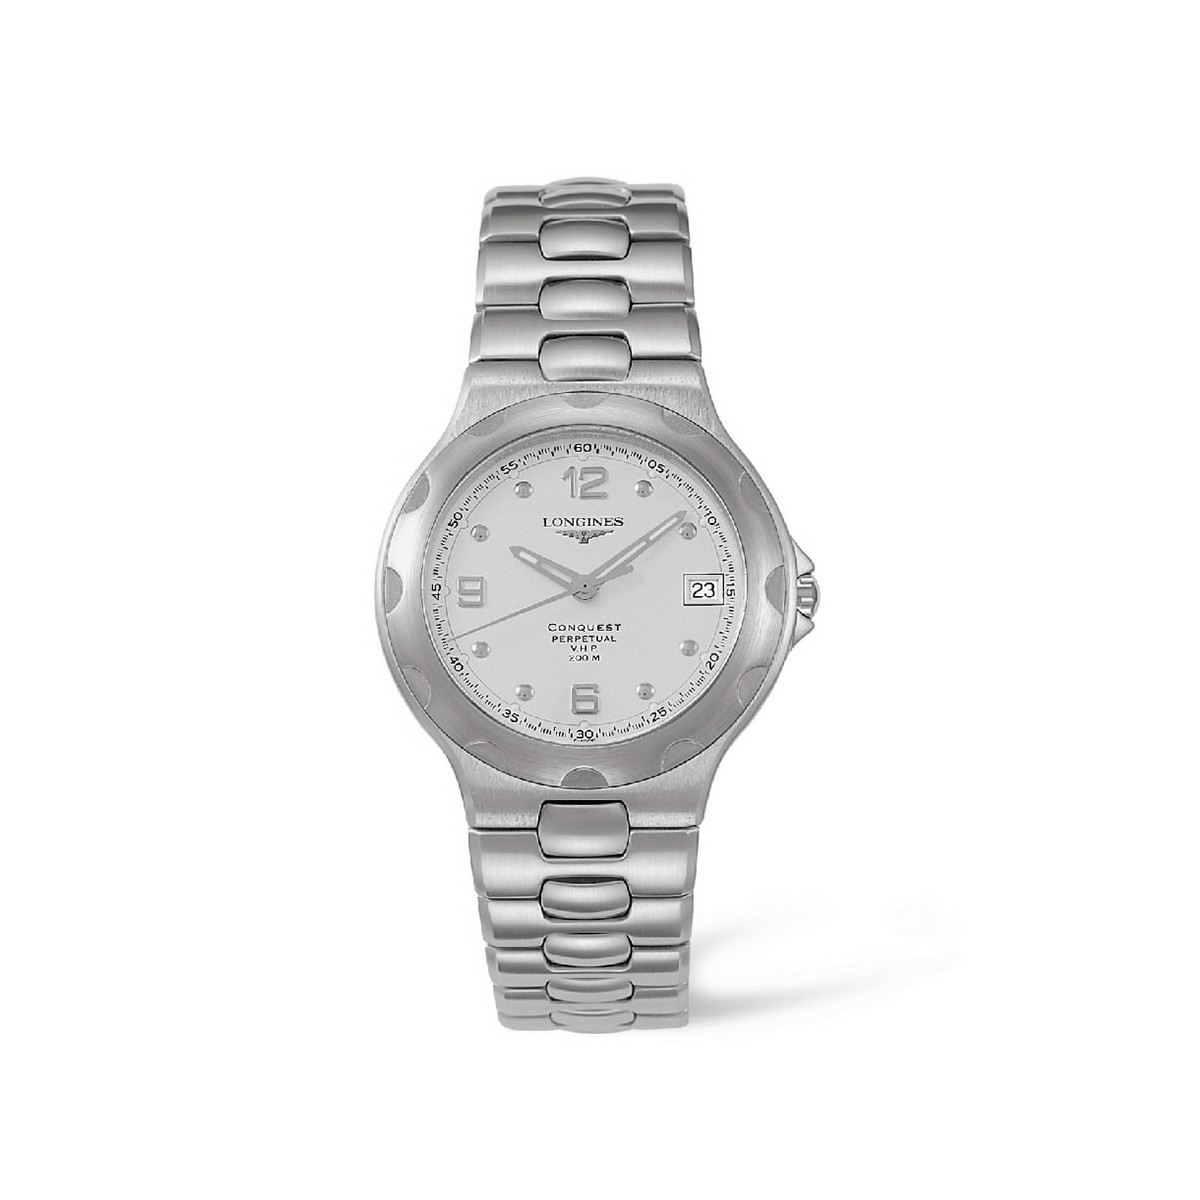 LONGINES CONQUEST WATCH